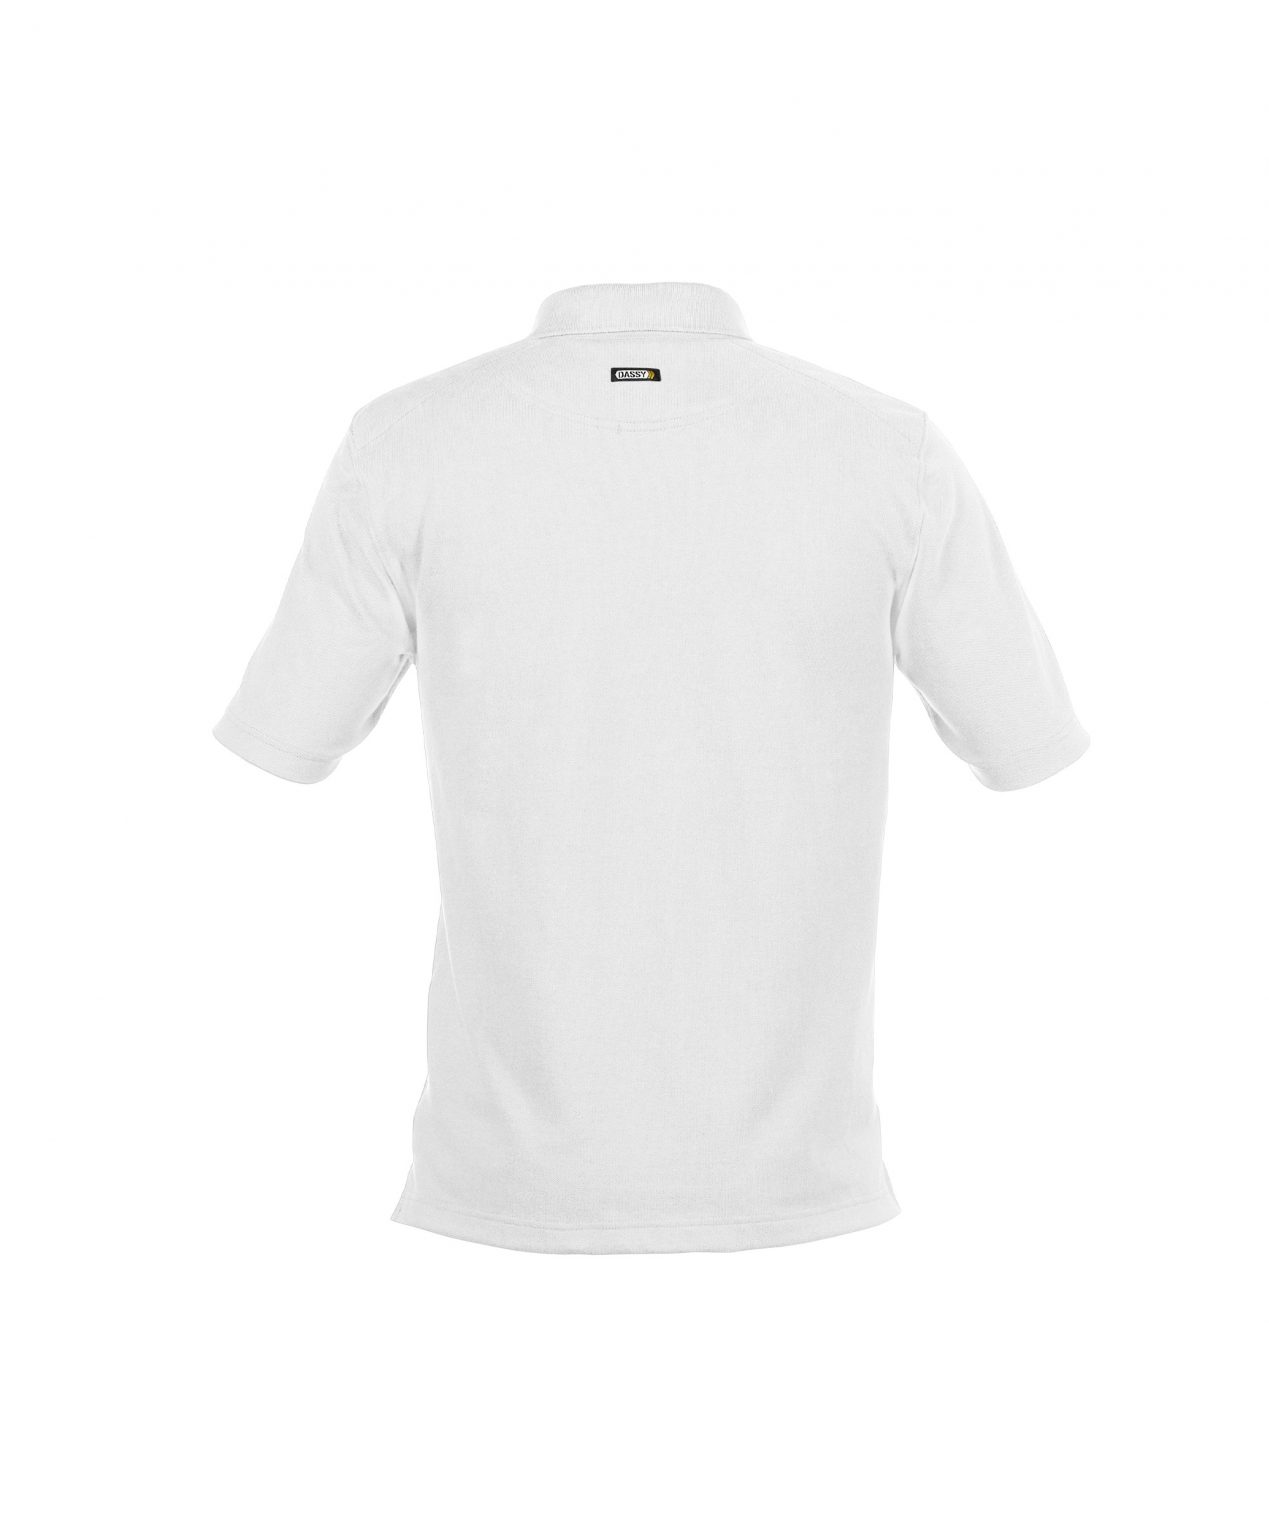 hugo polo shirt suitable for industrial washing white back